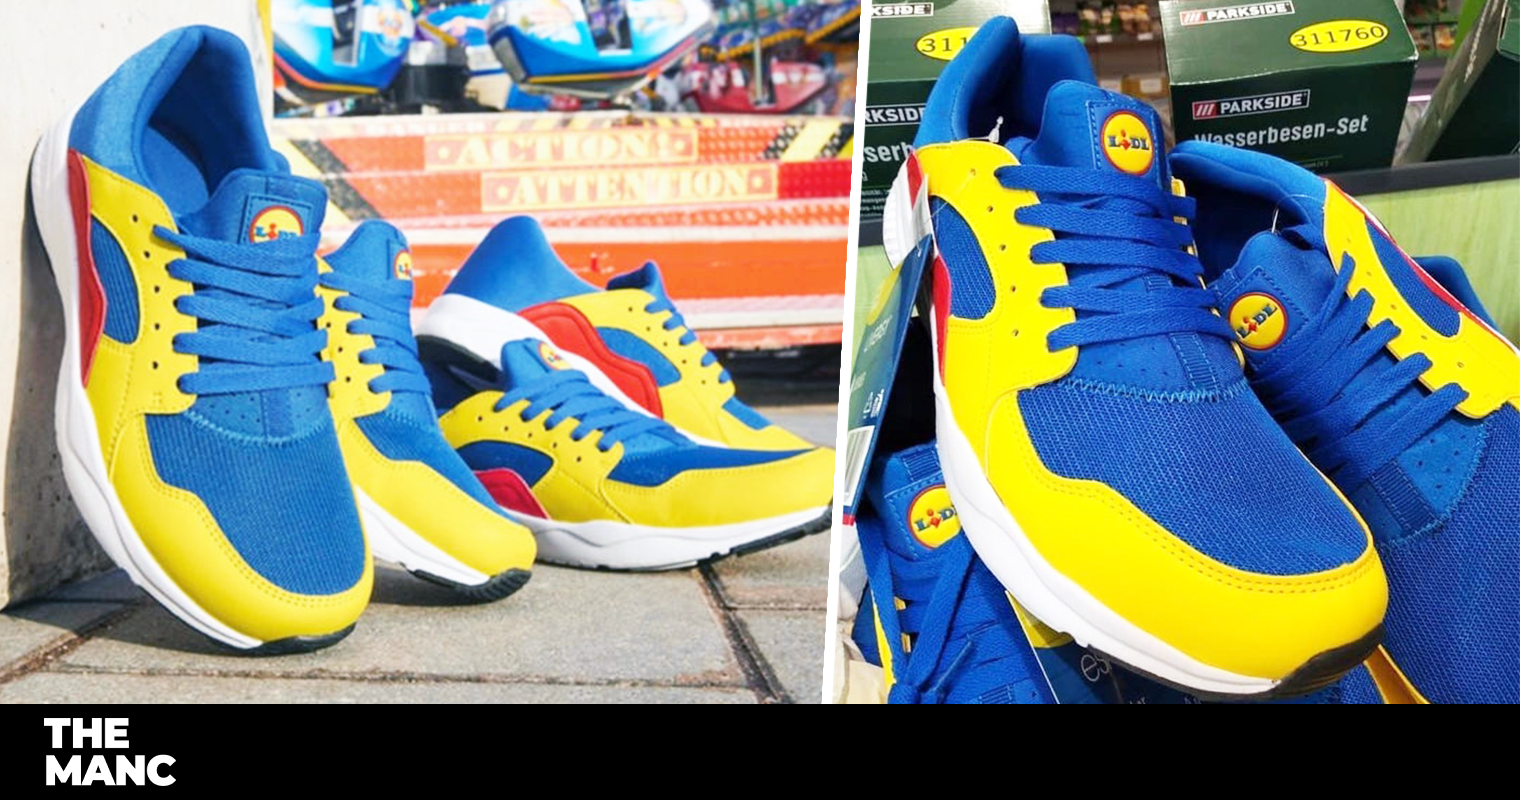 The Cut-Price $16 Lidl Sneakers, Now Selling For $6,000 On